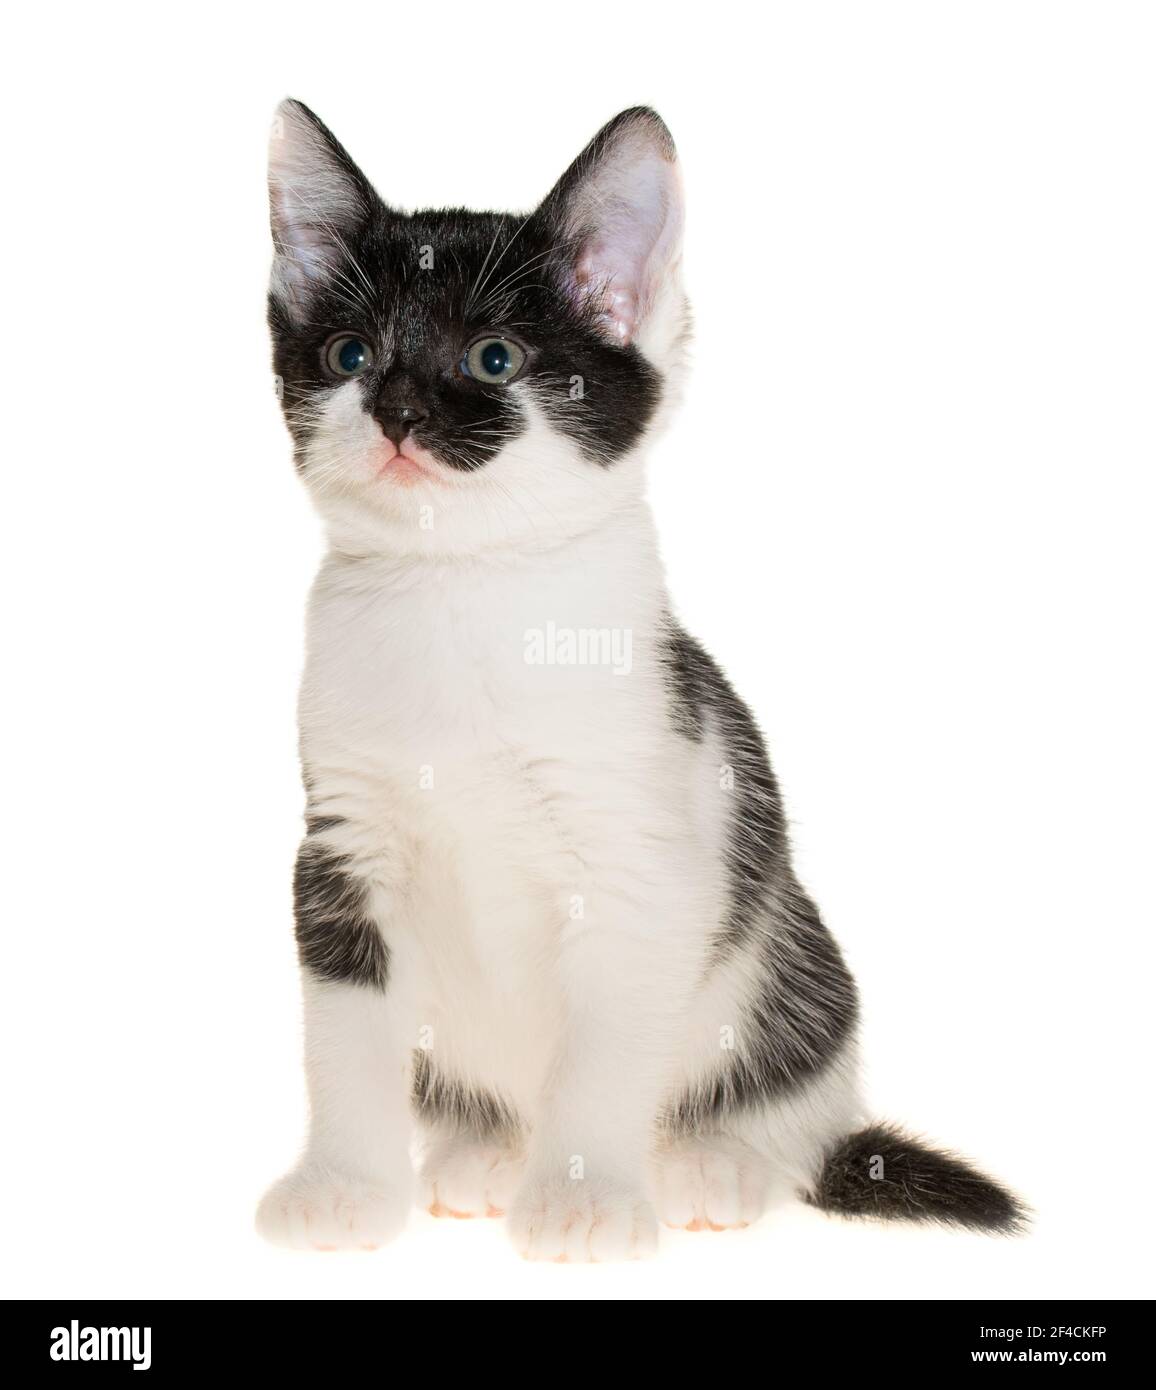 Bicolor black-white small shorthair kitten sitting isolated on a white background. Stock Photo